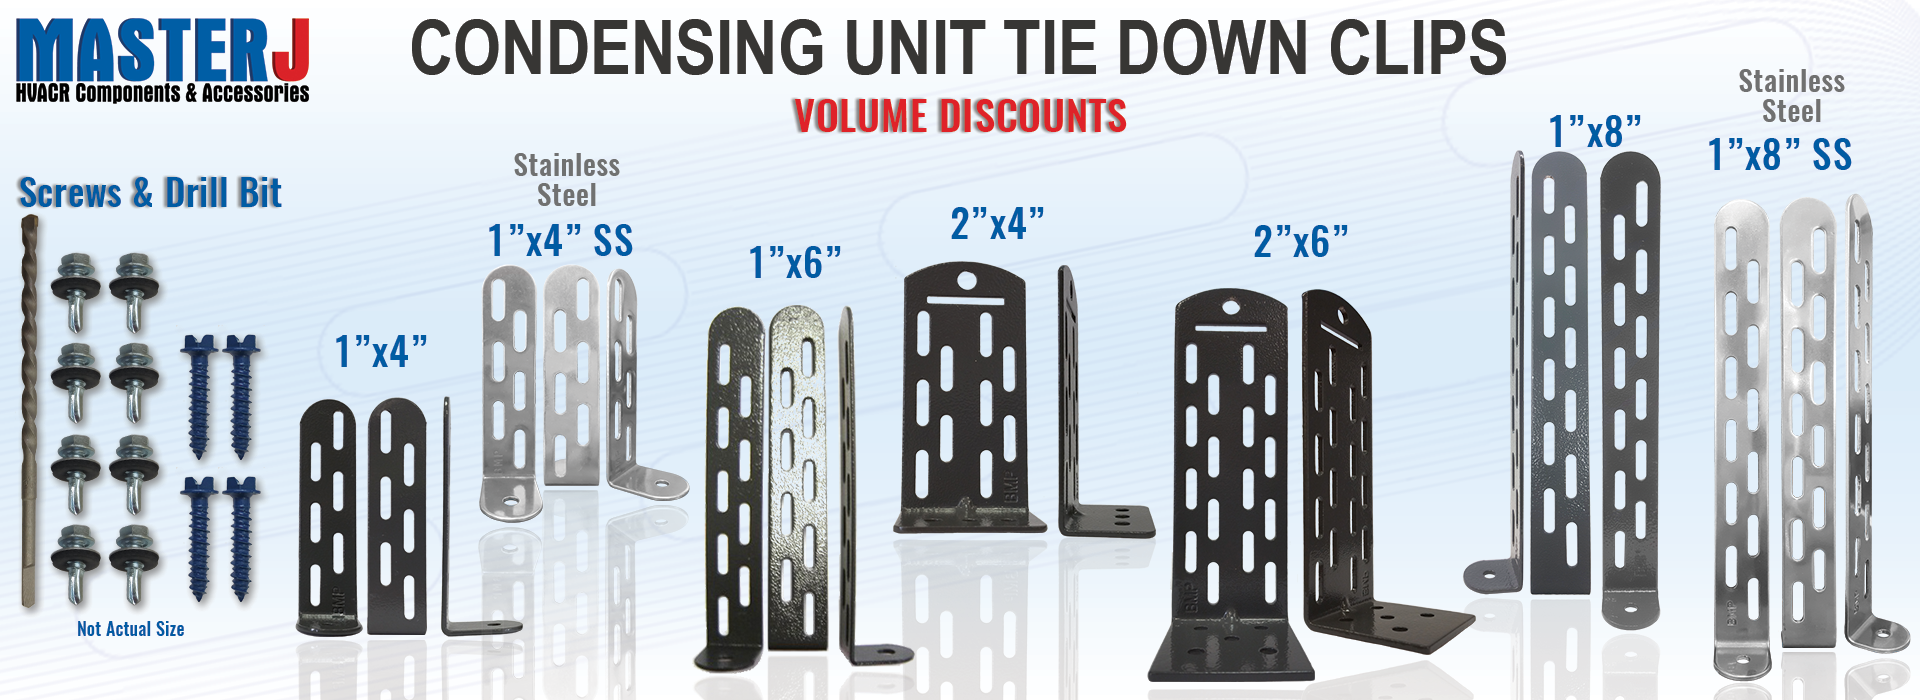 Condensing Unit Tie Down Clips from MasterJ, Inc.